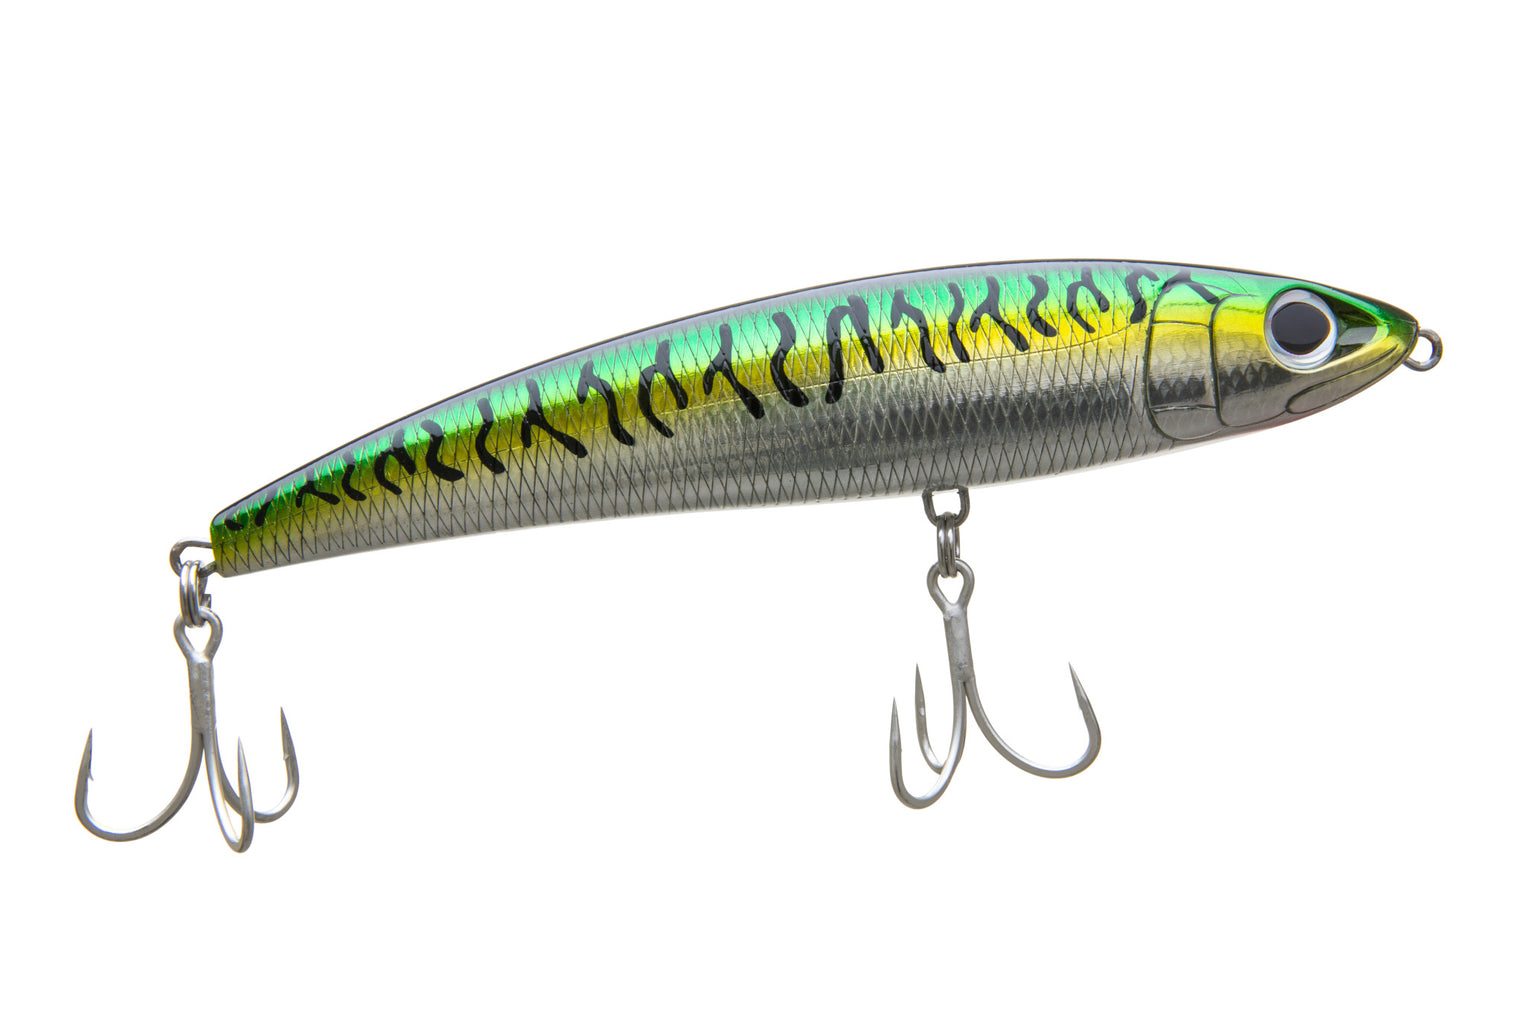 Discontinued YoZuri Sinking lures for freshwater saltwater luring